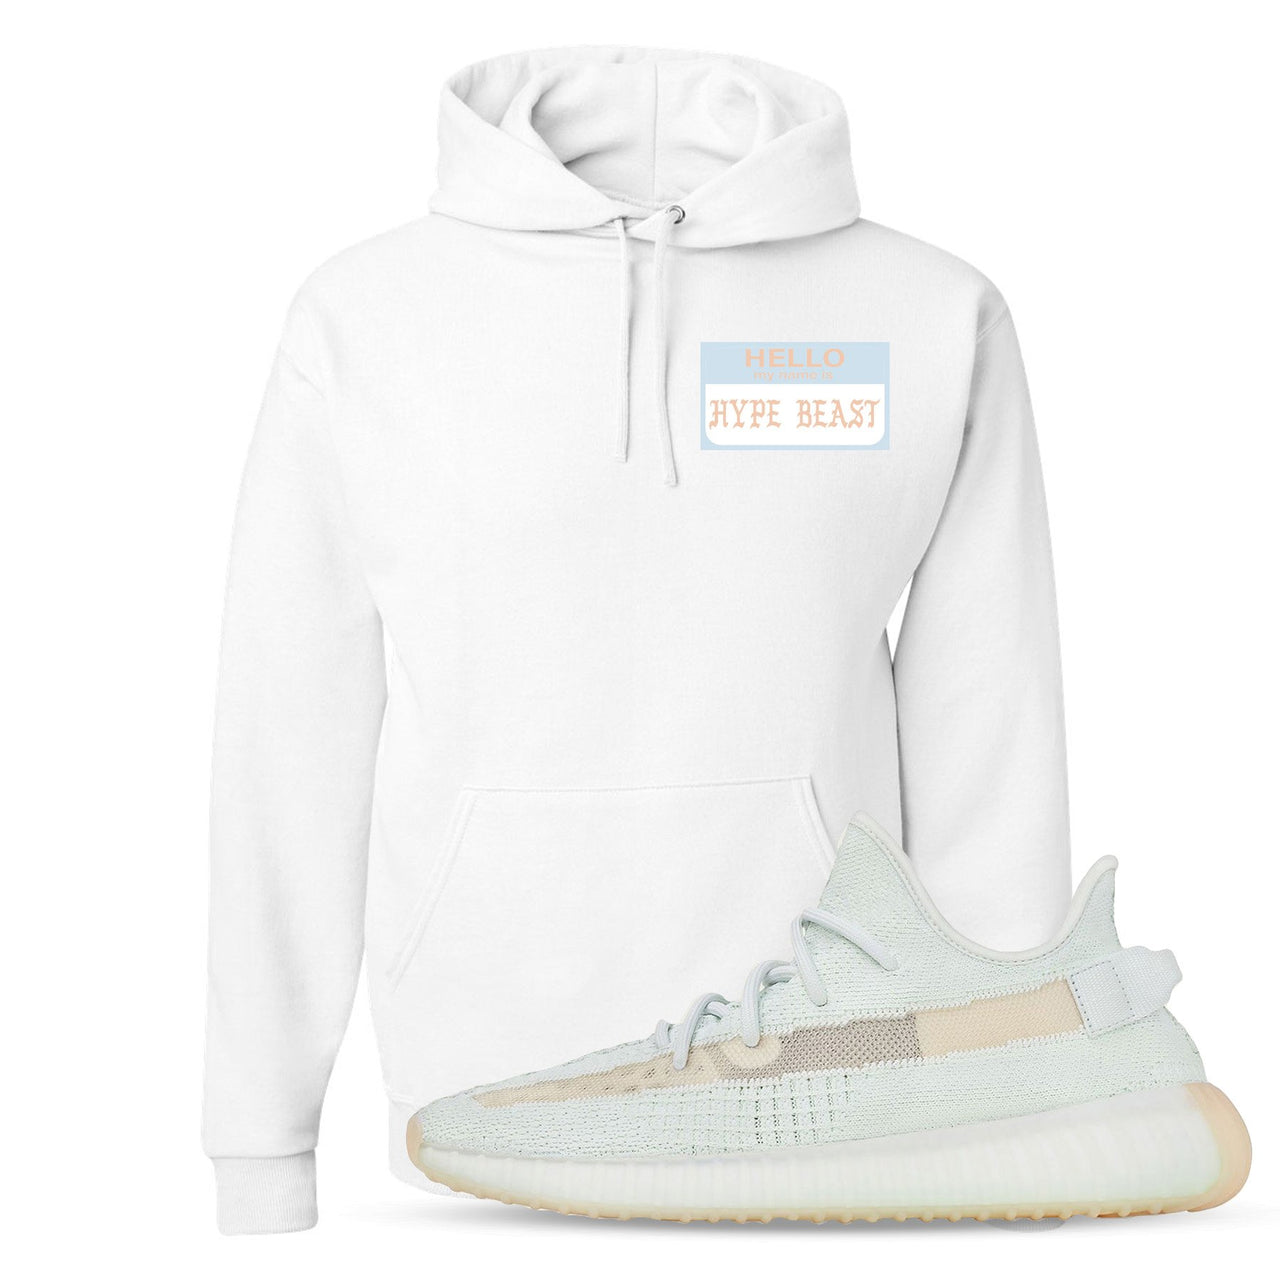 Hyperspace 350s Hoodie | Hello My Name Is Hype Beast Pablo, White